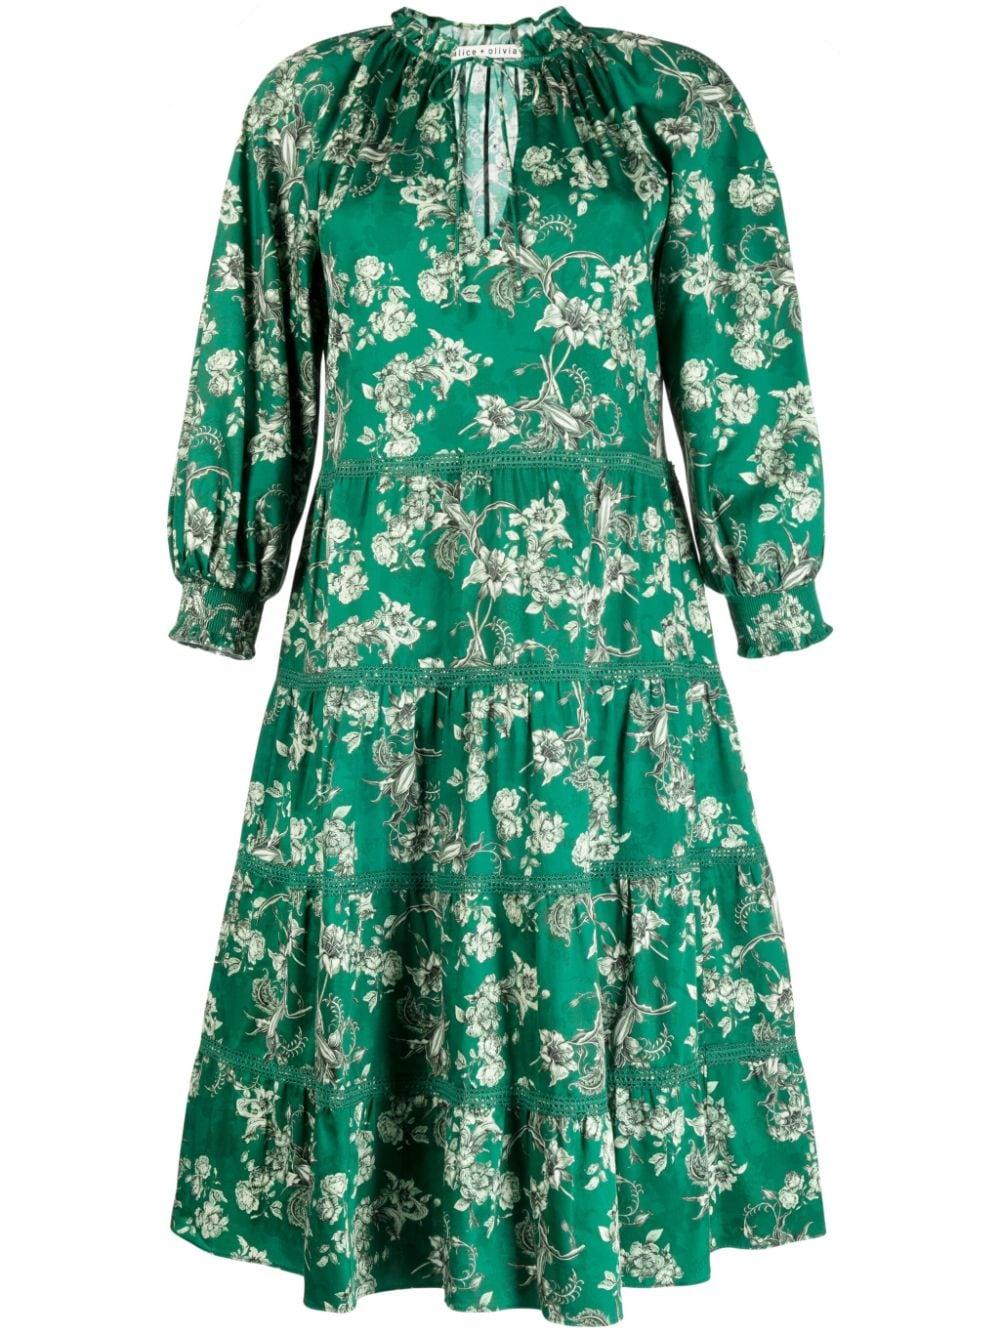 Alice + Olivia Layla Floral-print Tiered Dress in Green | Lyst